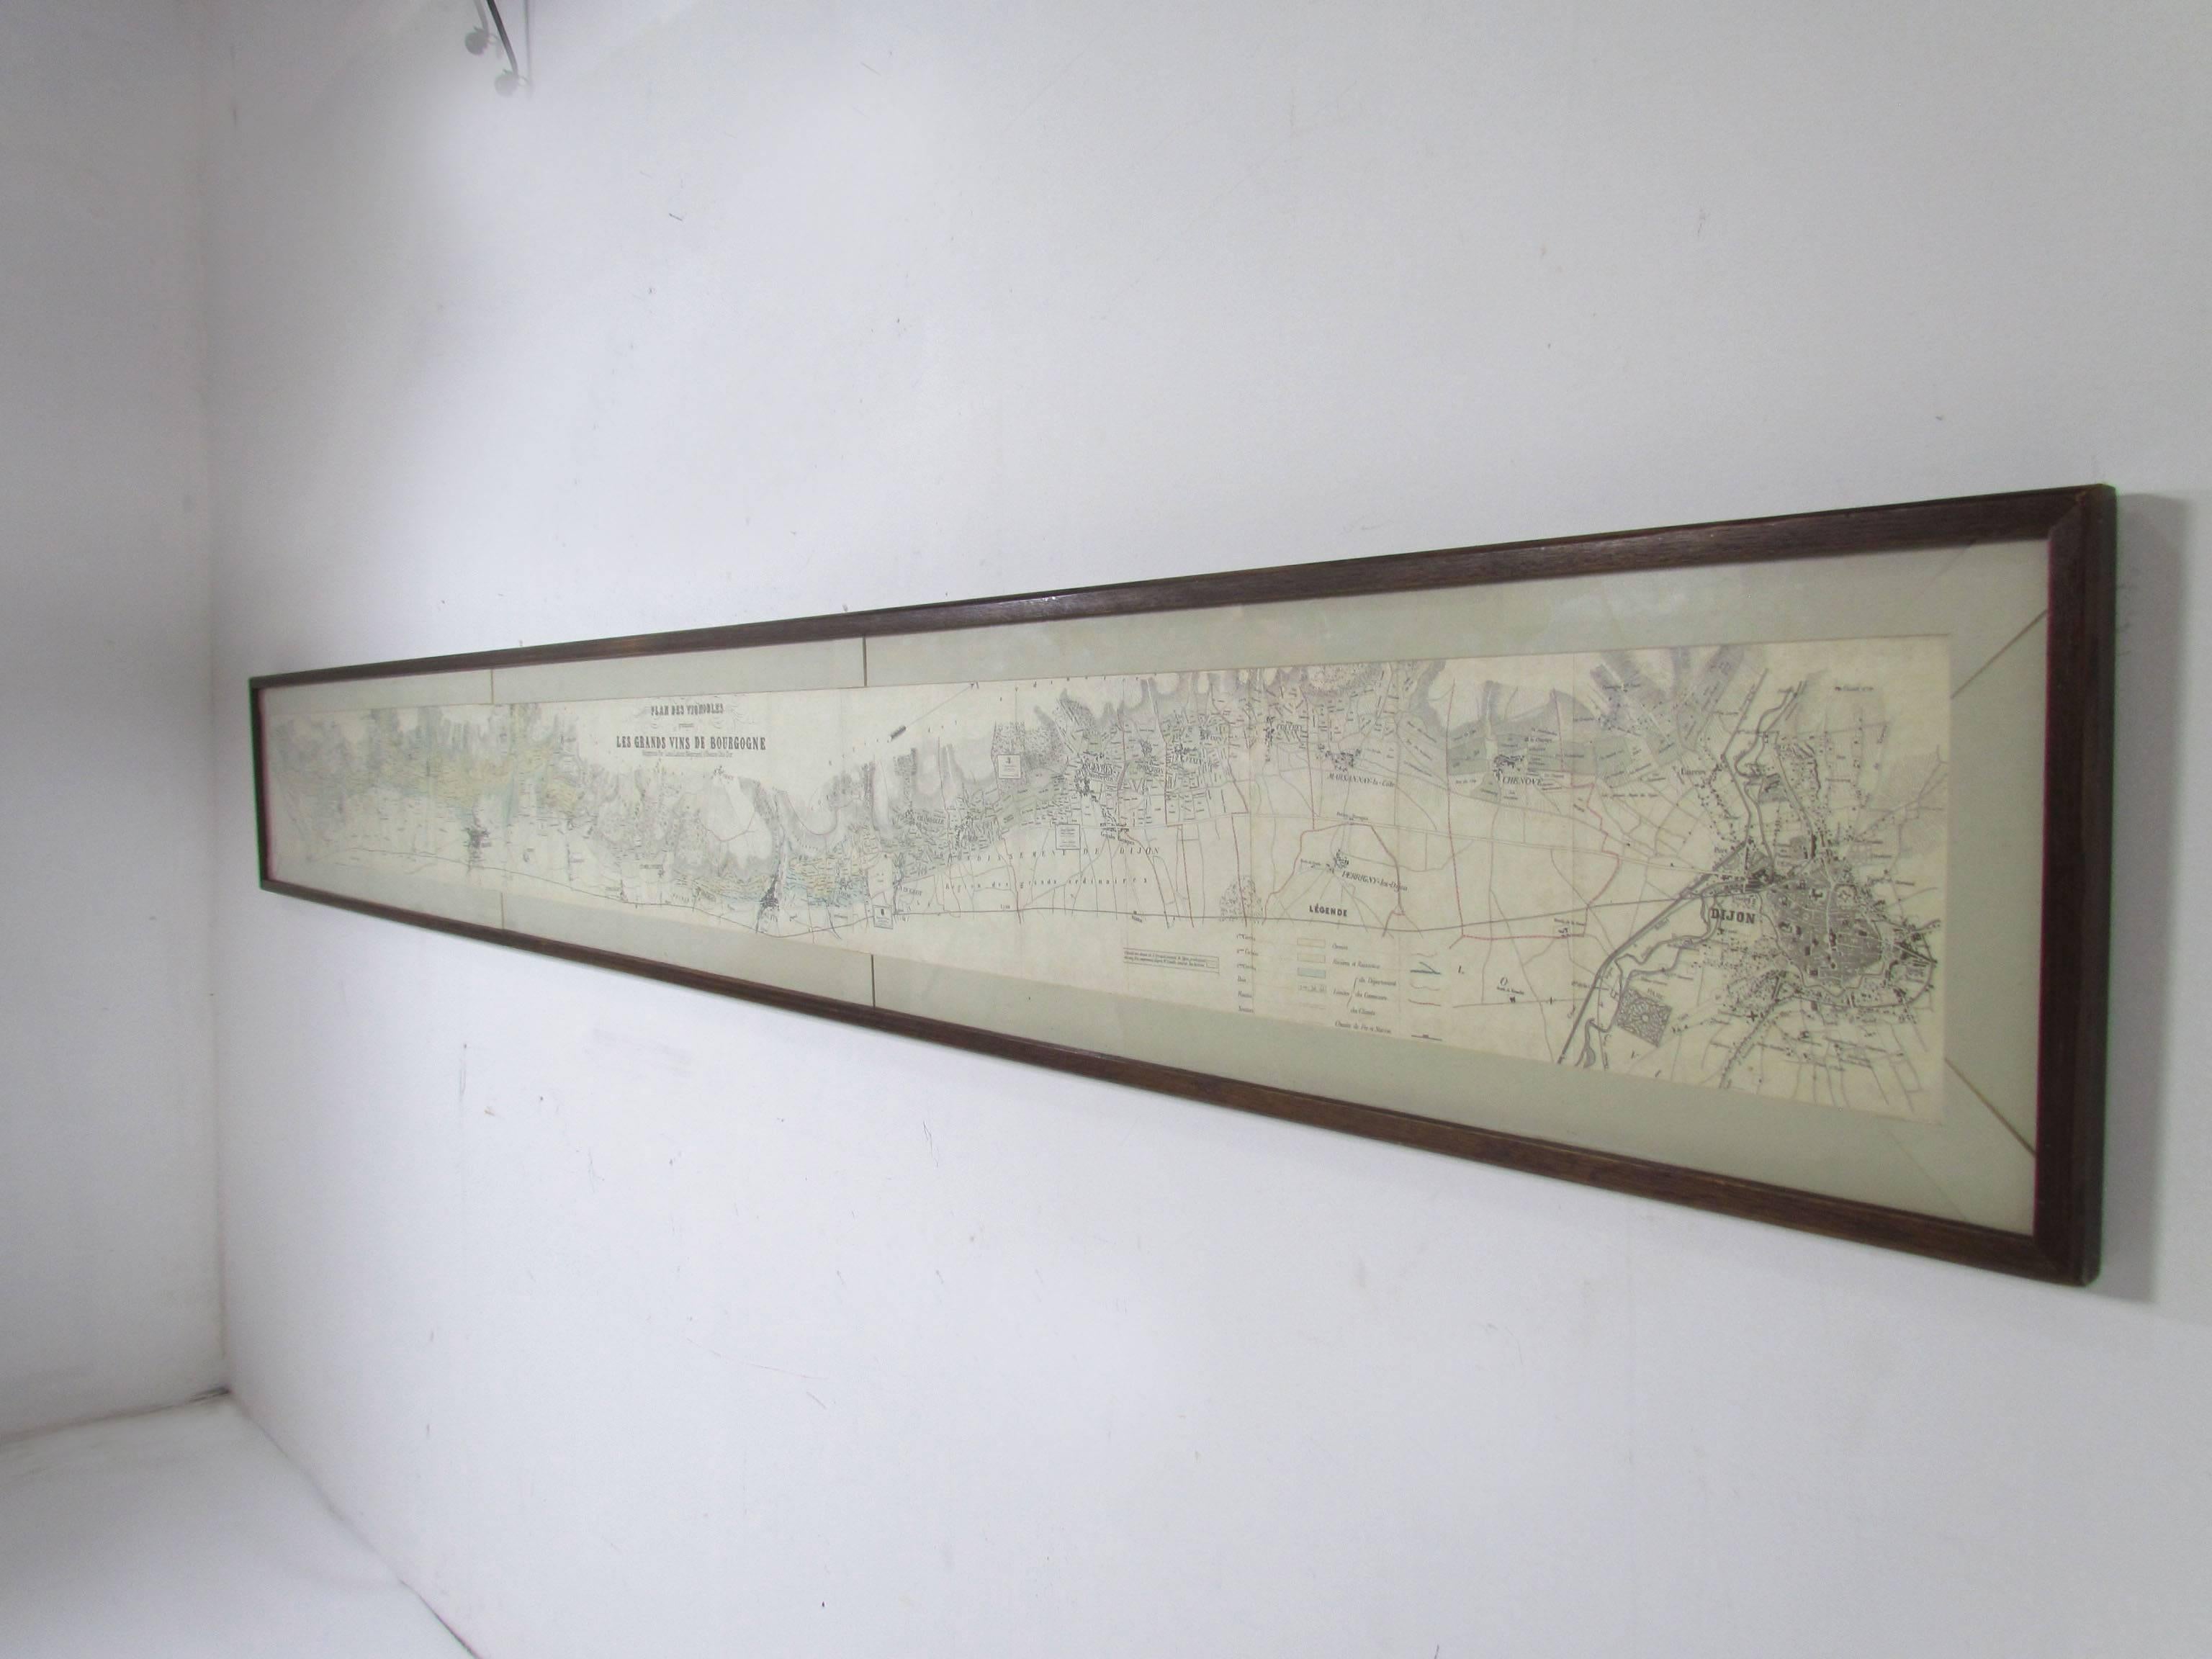 Paper Panoramic Antique Lithographic Map for Louis Latour, Burgundy France Region